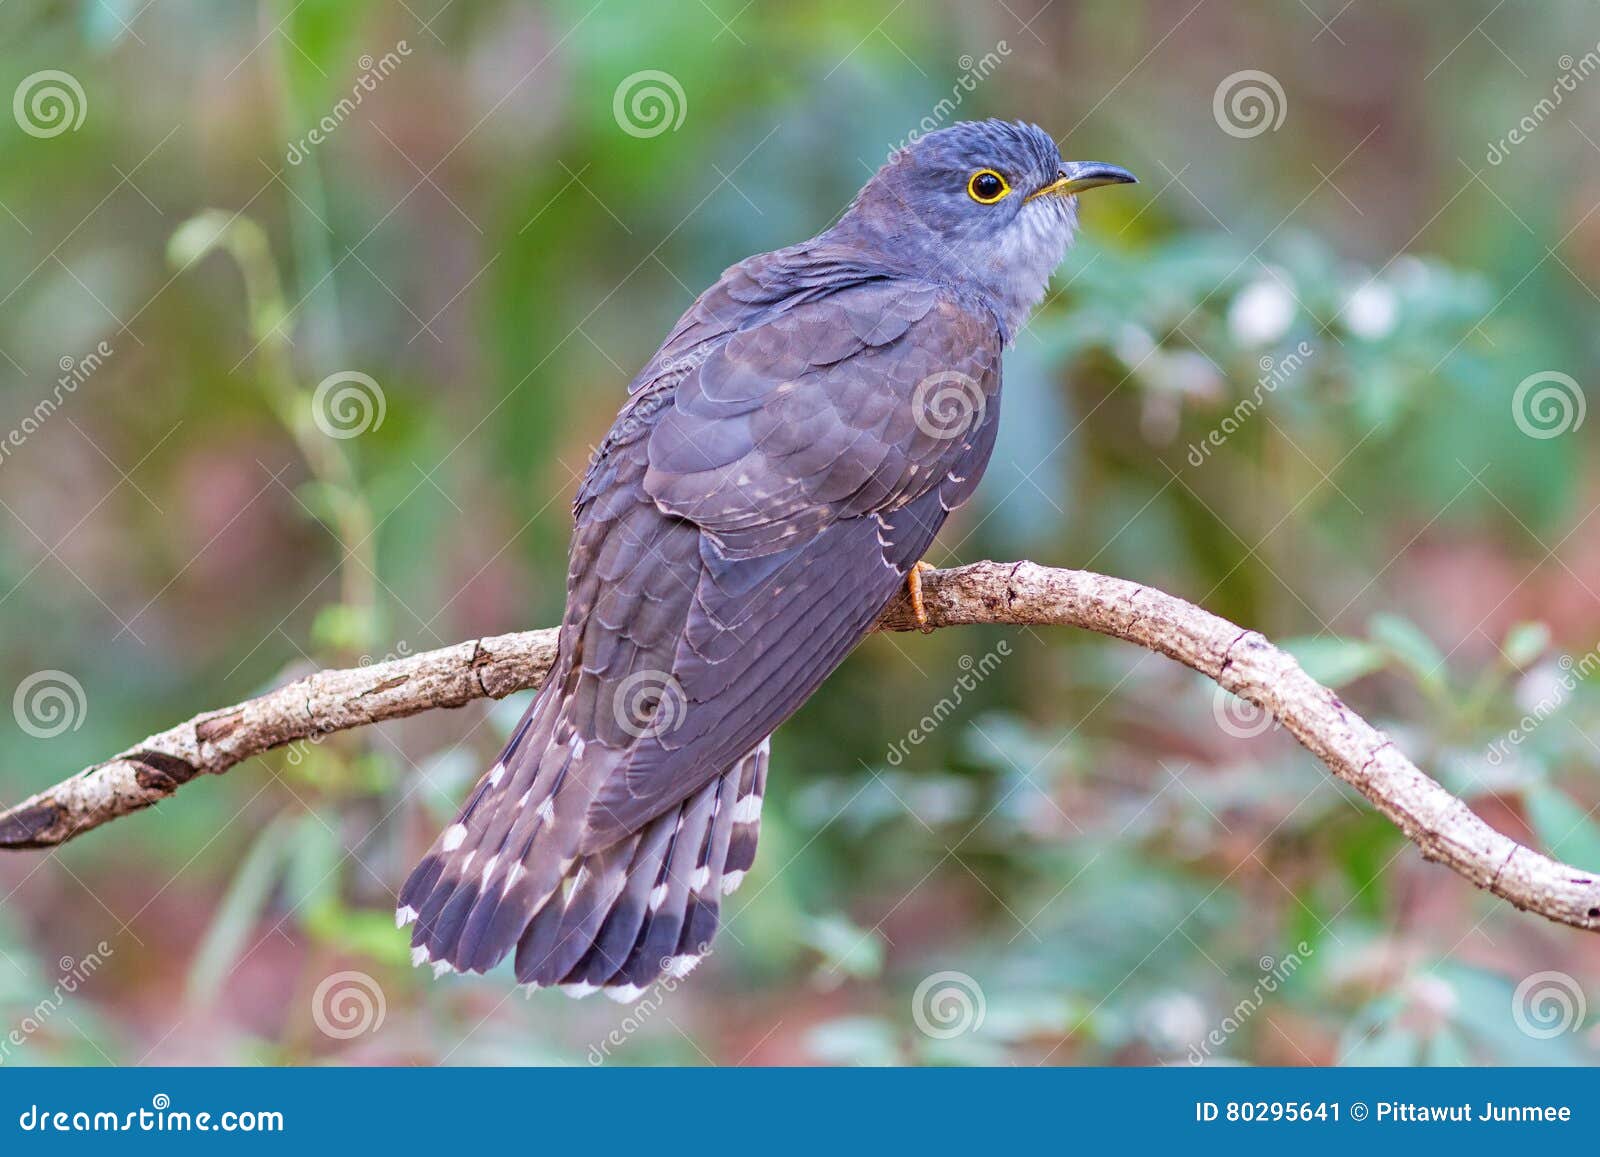 beautiful of smallest cuckoo bird and very rare standing on branch